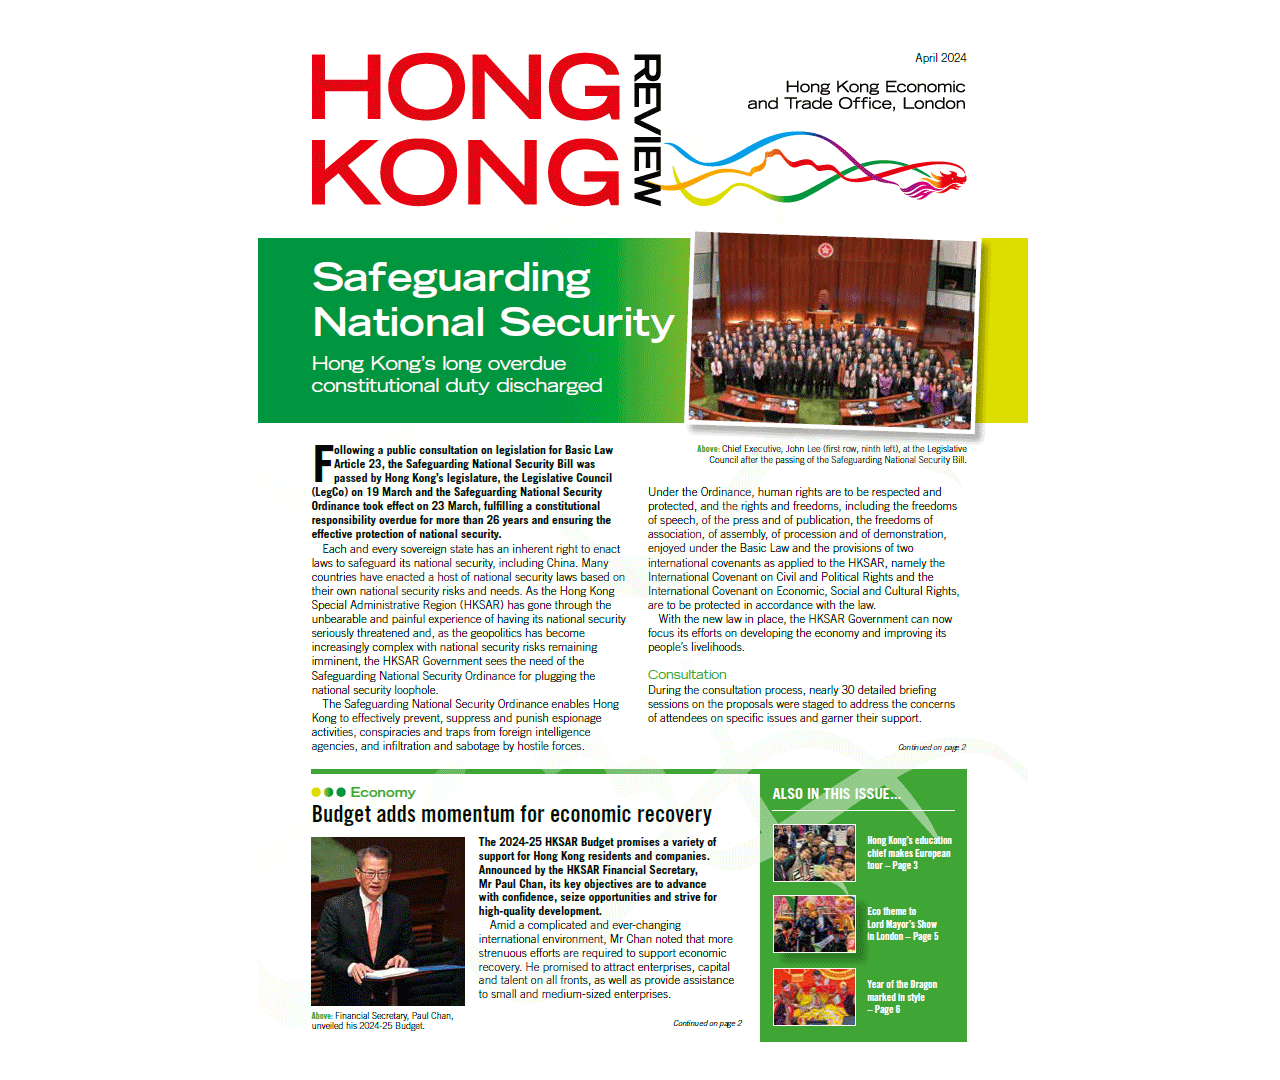 Latest edition of Hong Kong Review is now online